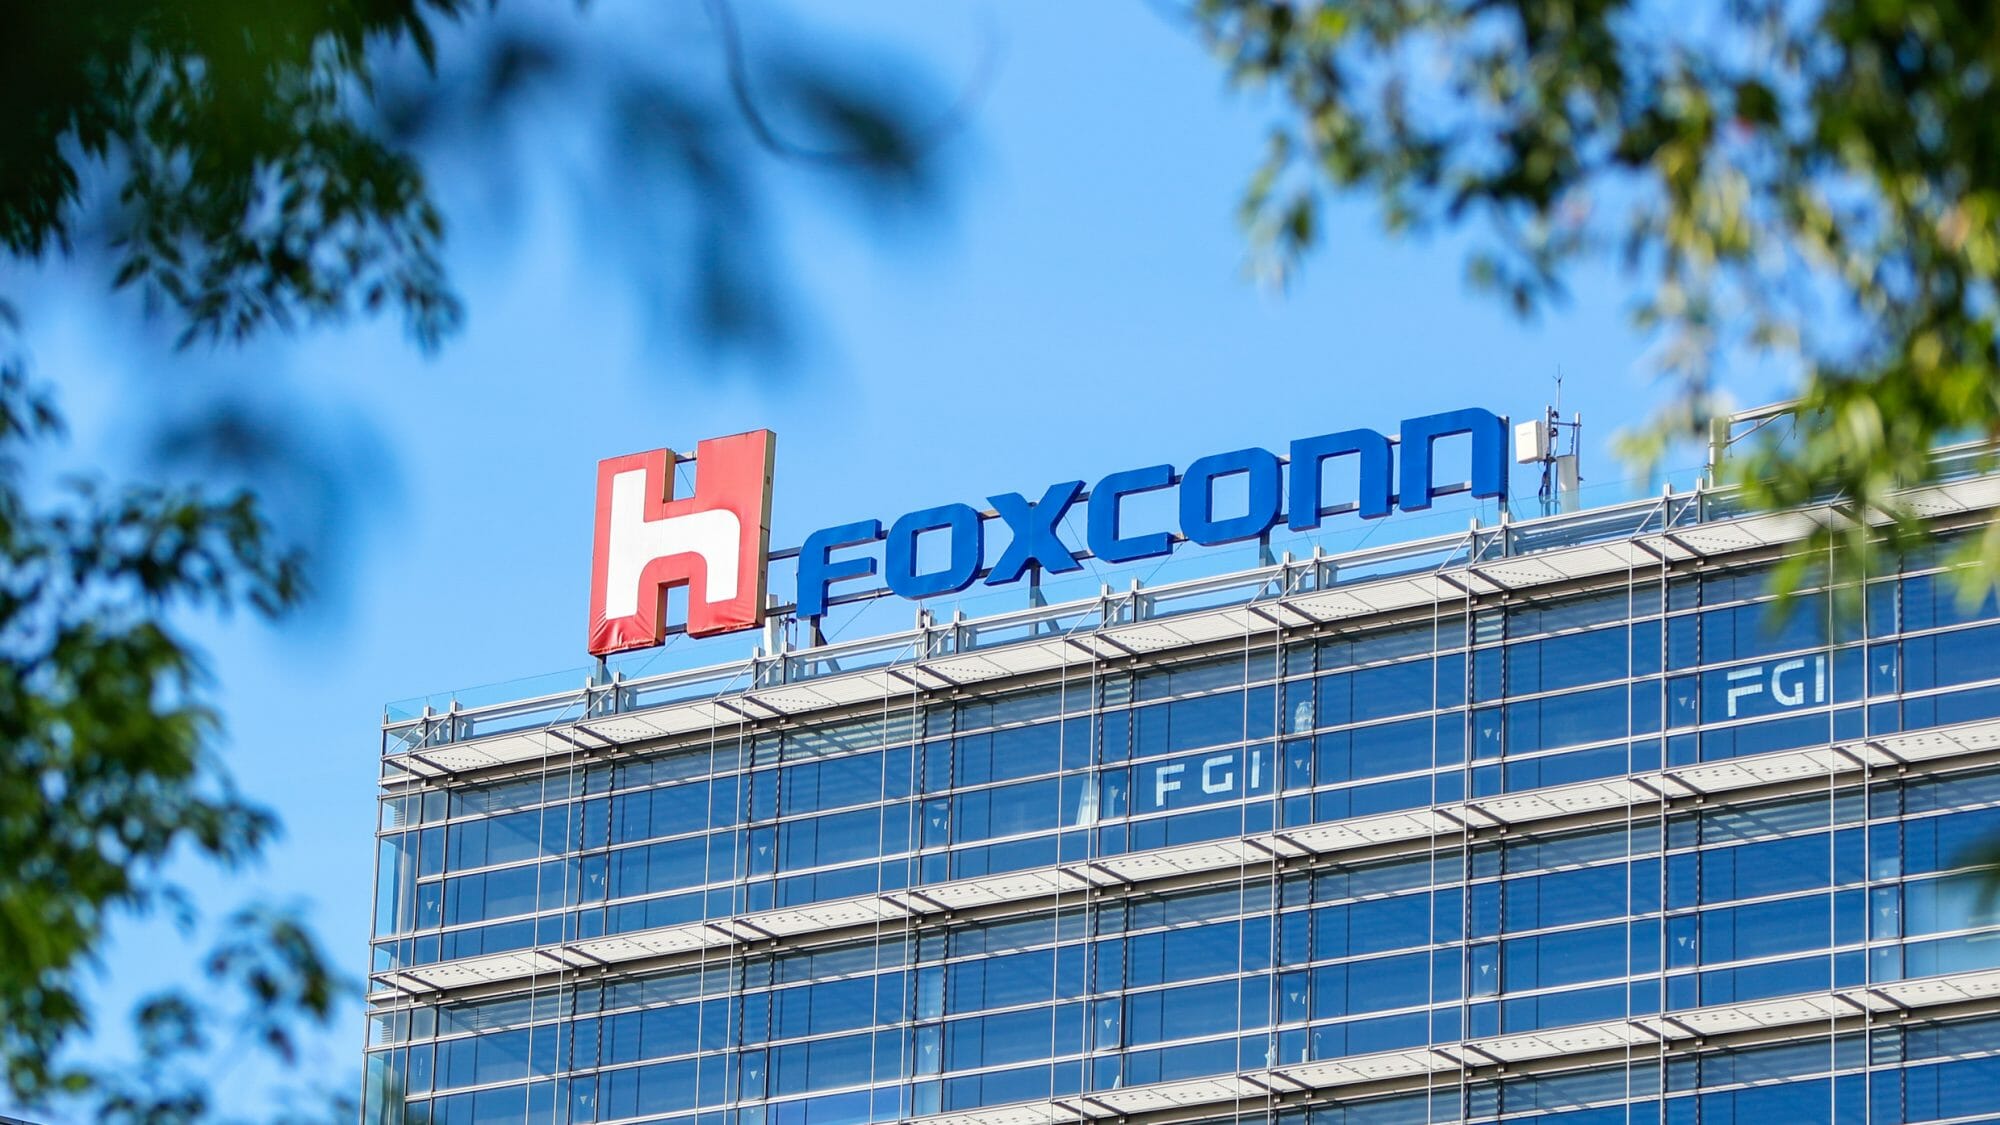 Foxconn to invest $200 million in India for AirPods production, diversifying away from China.